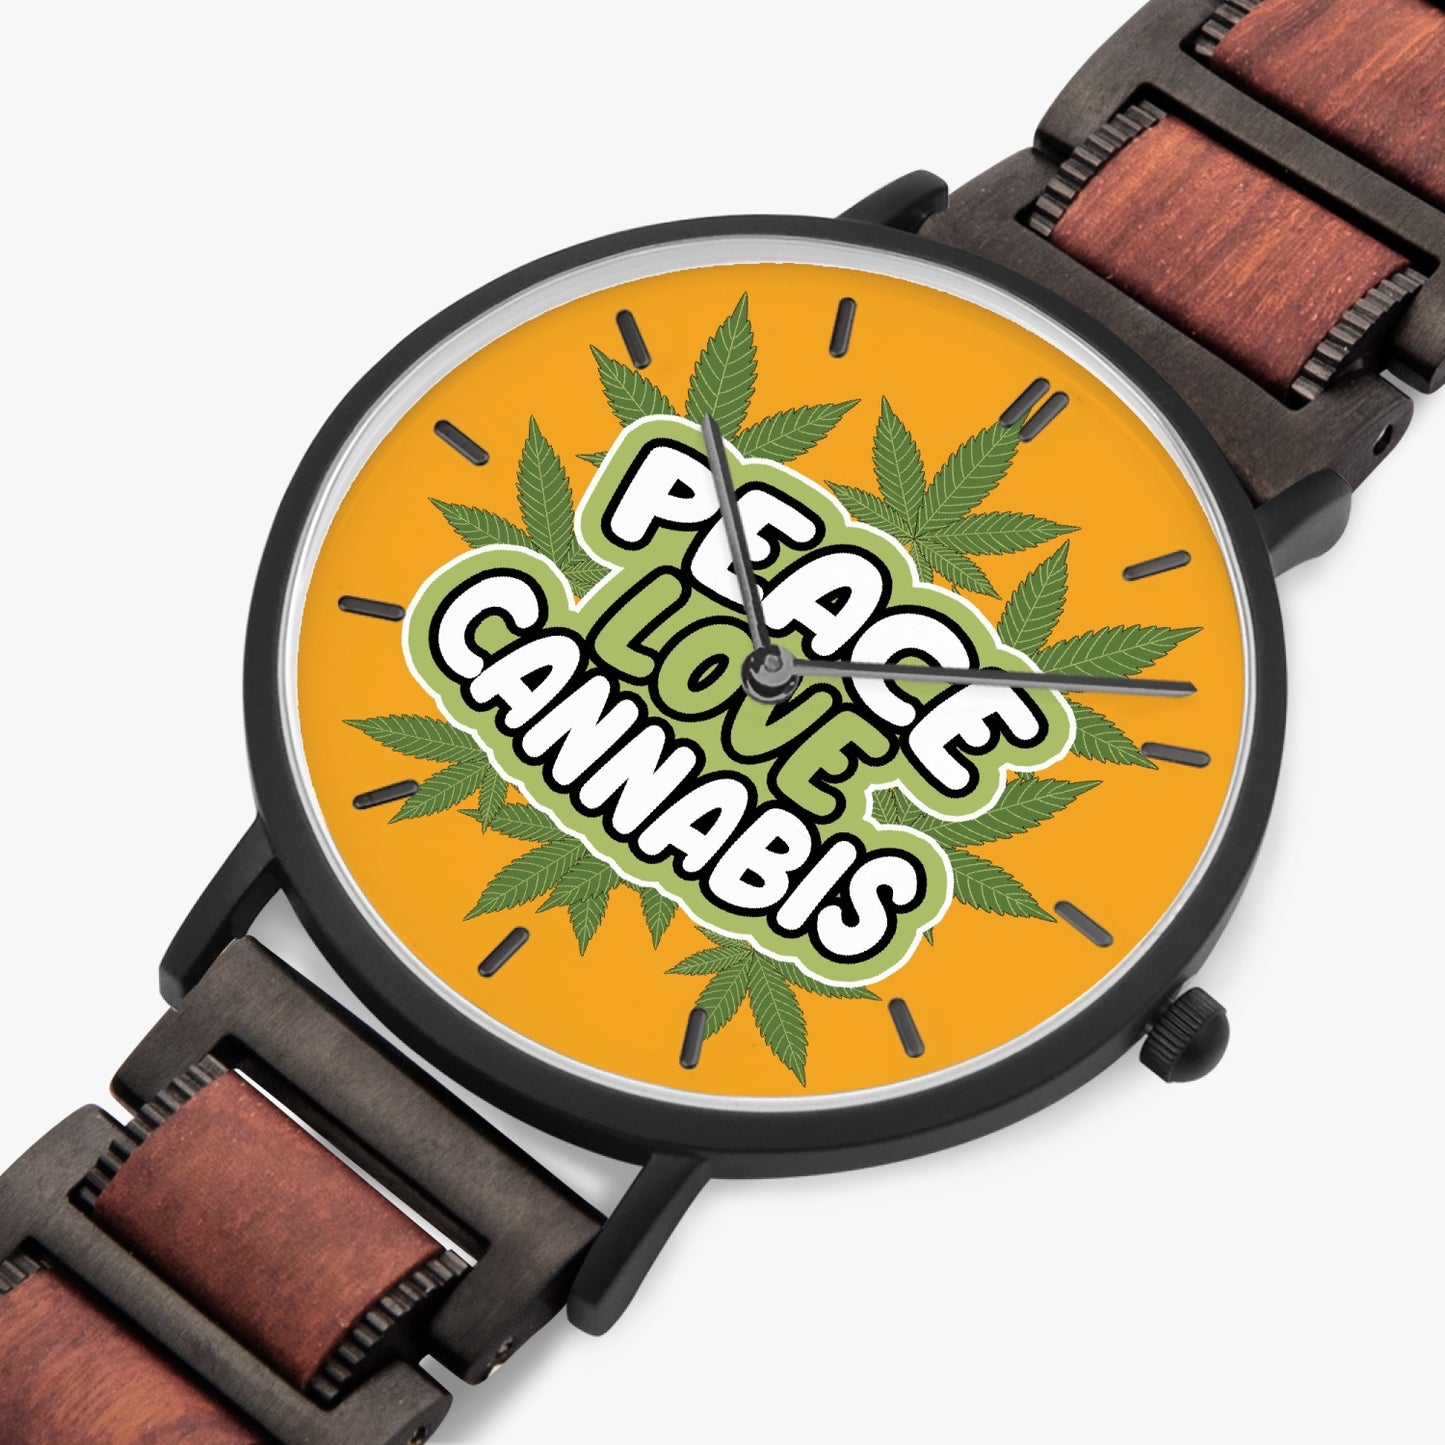 Love Peace Cannabis New Wooden Strap Quartz Watch - With Indicators